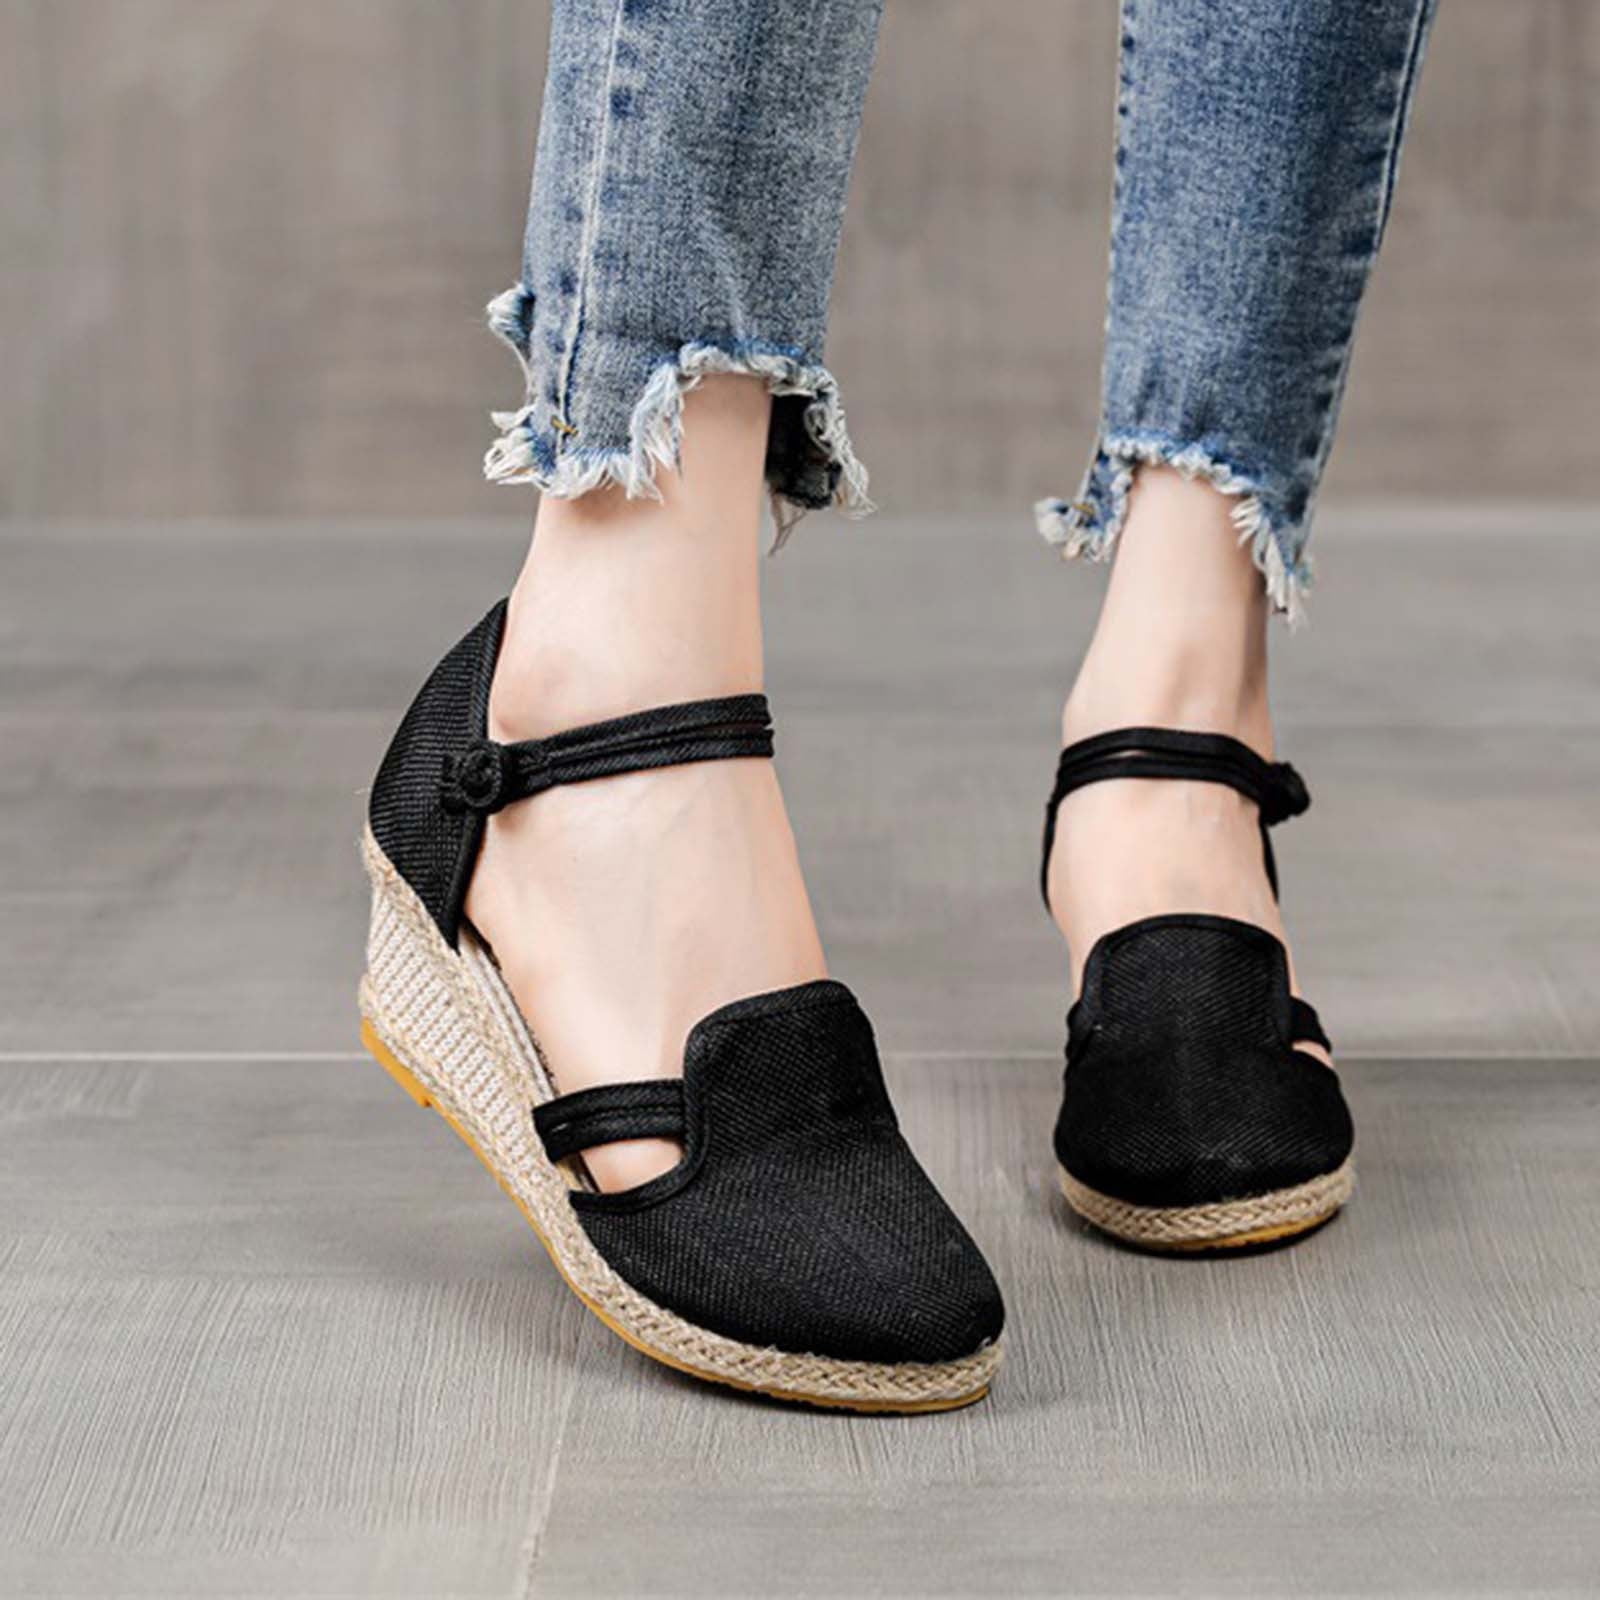 Lace Up Ankle Closed Toe Jute Trim Wedges | Closed toe espadrilles, Ankle  strap heels, Espadrilles wedges